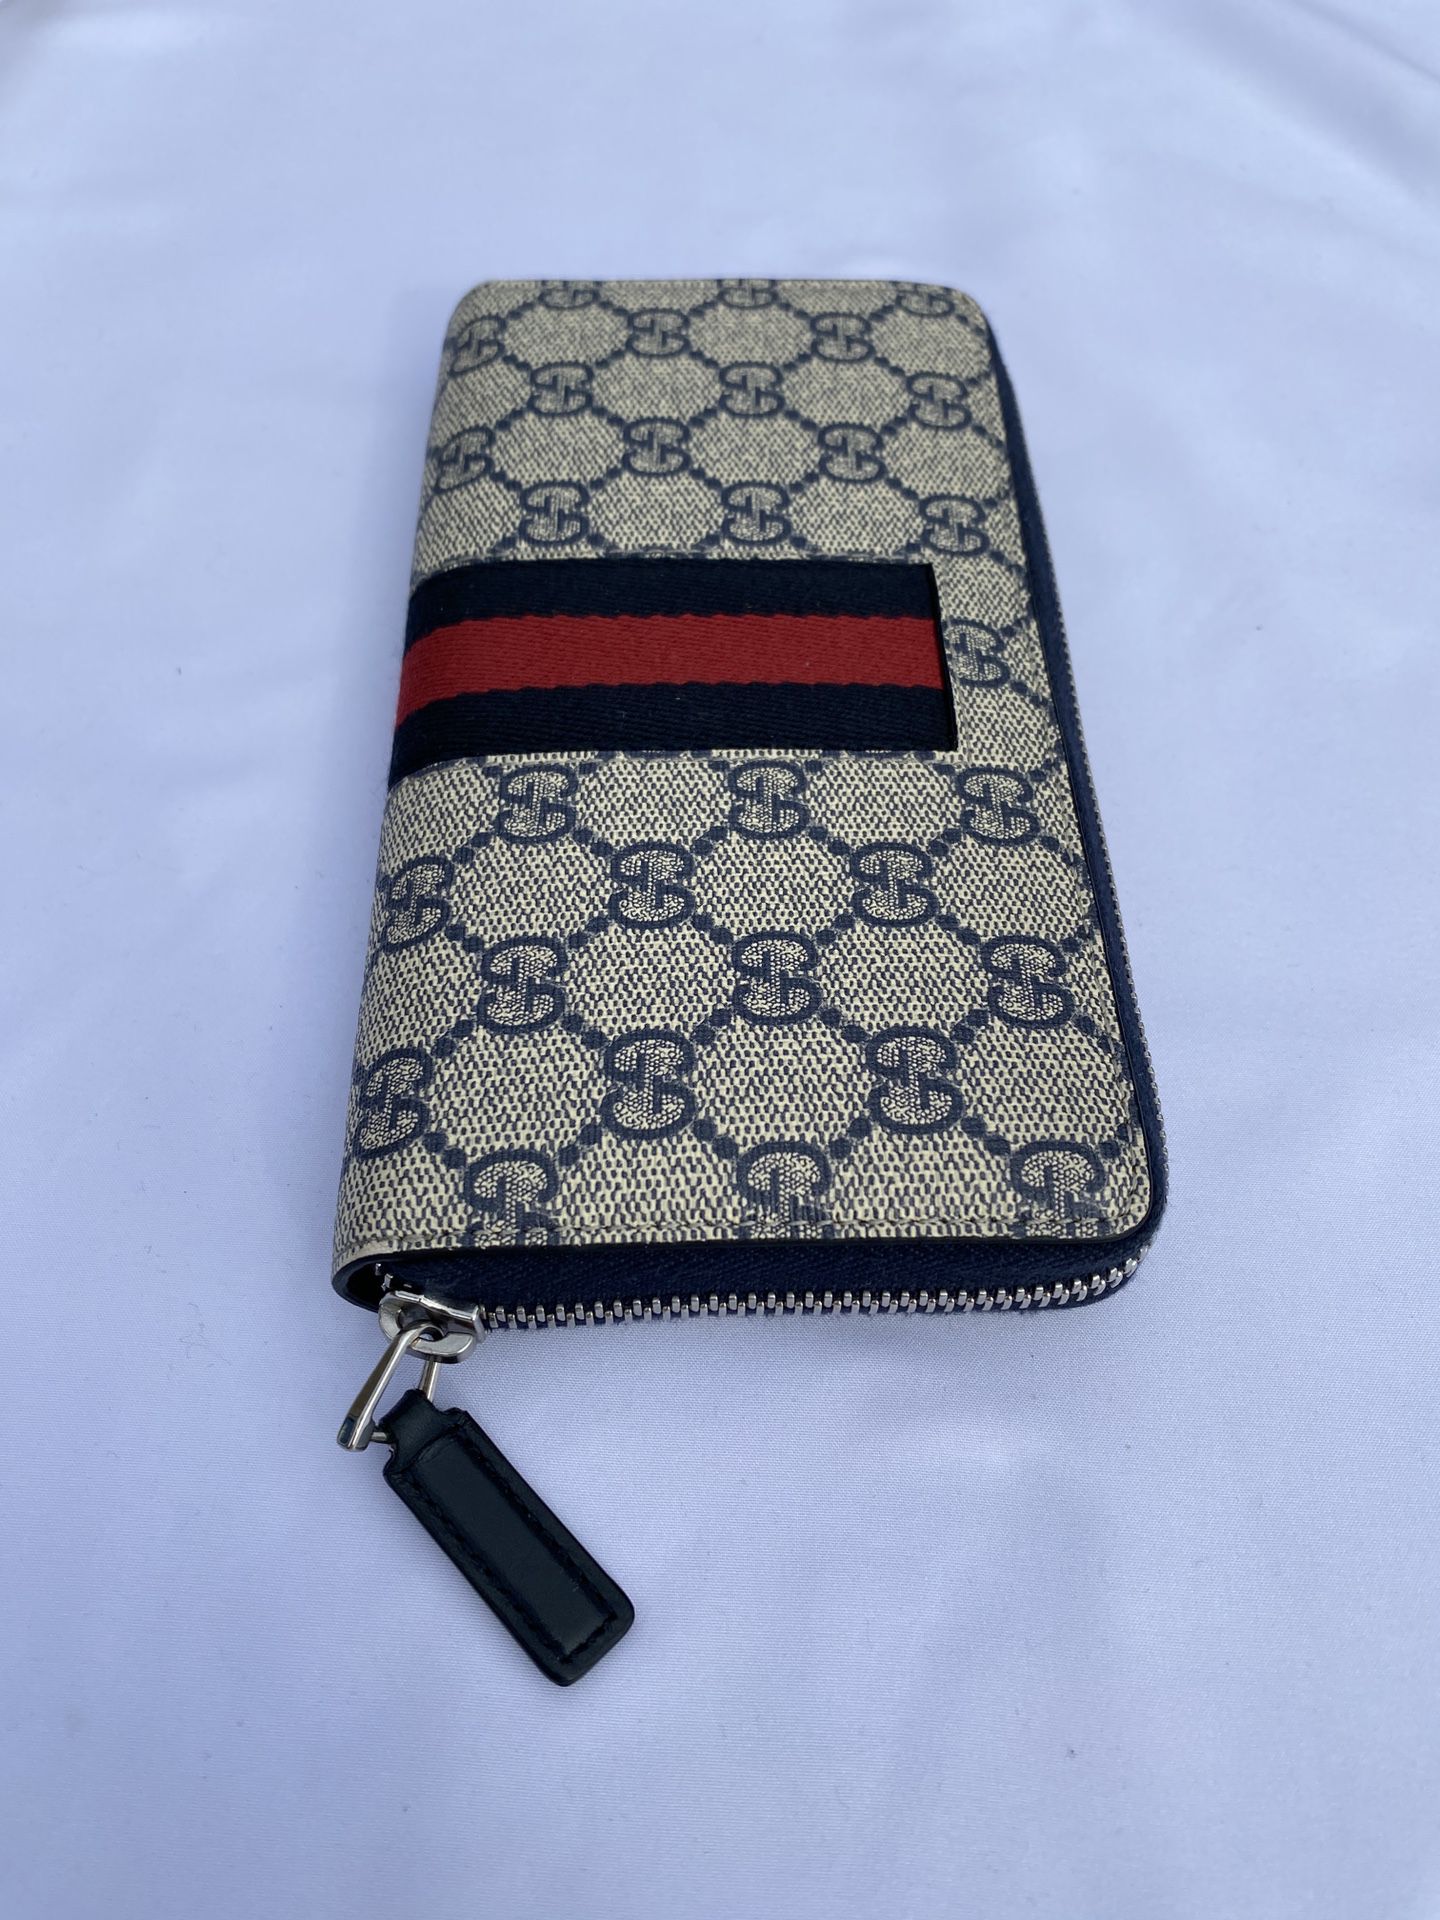 Gucci Ophidia Zip Around Wallet - Beige and Blue with no double G (Rare)